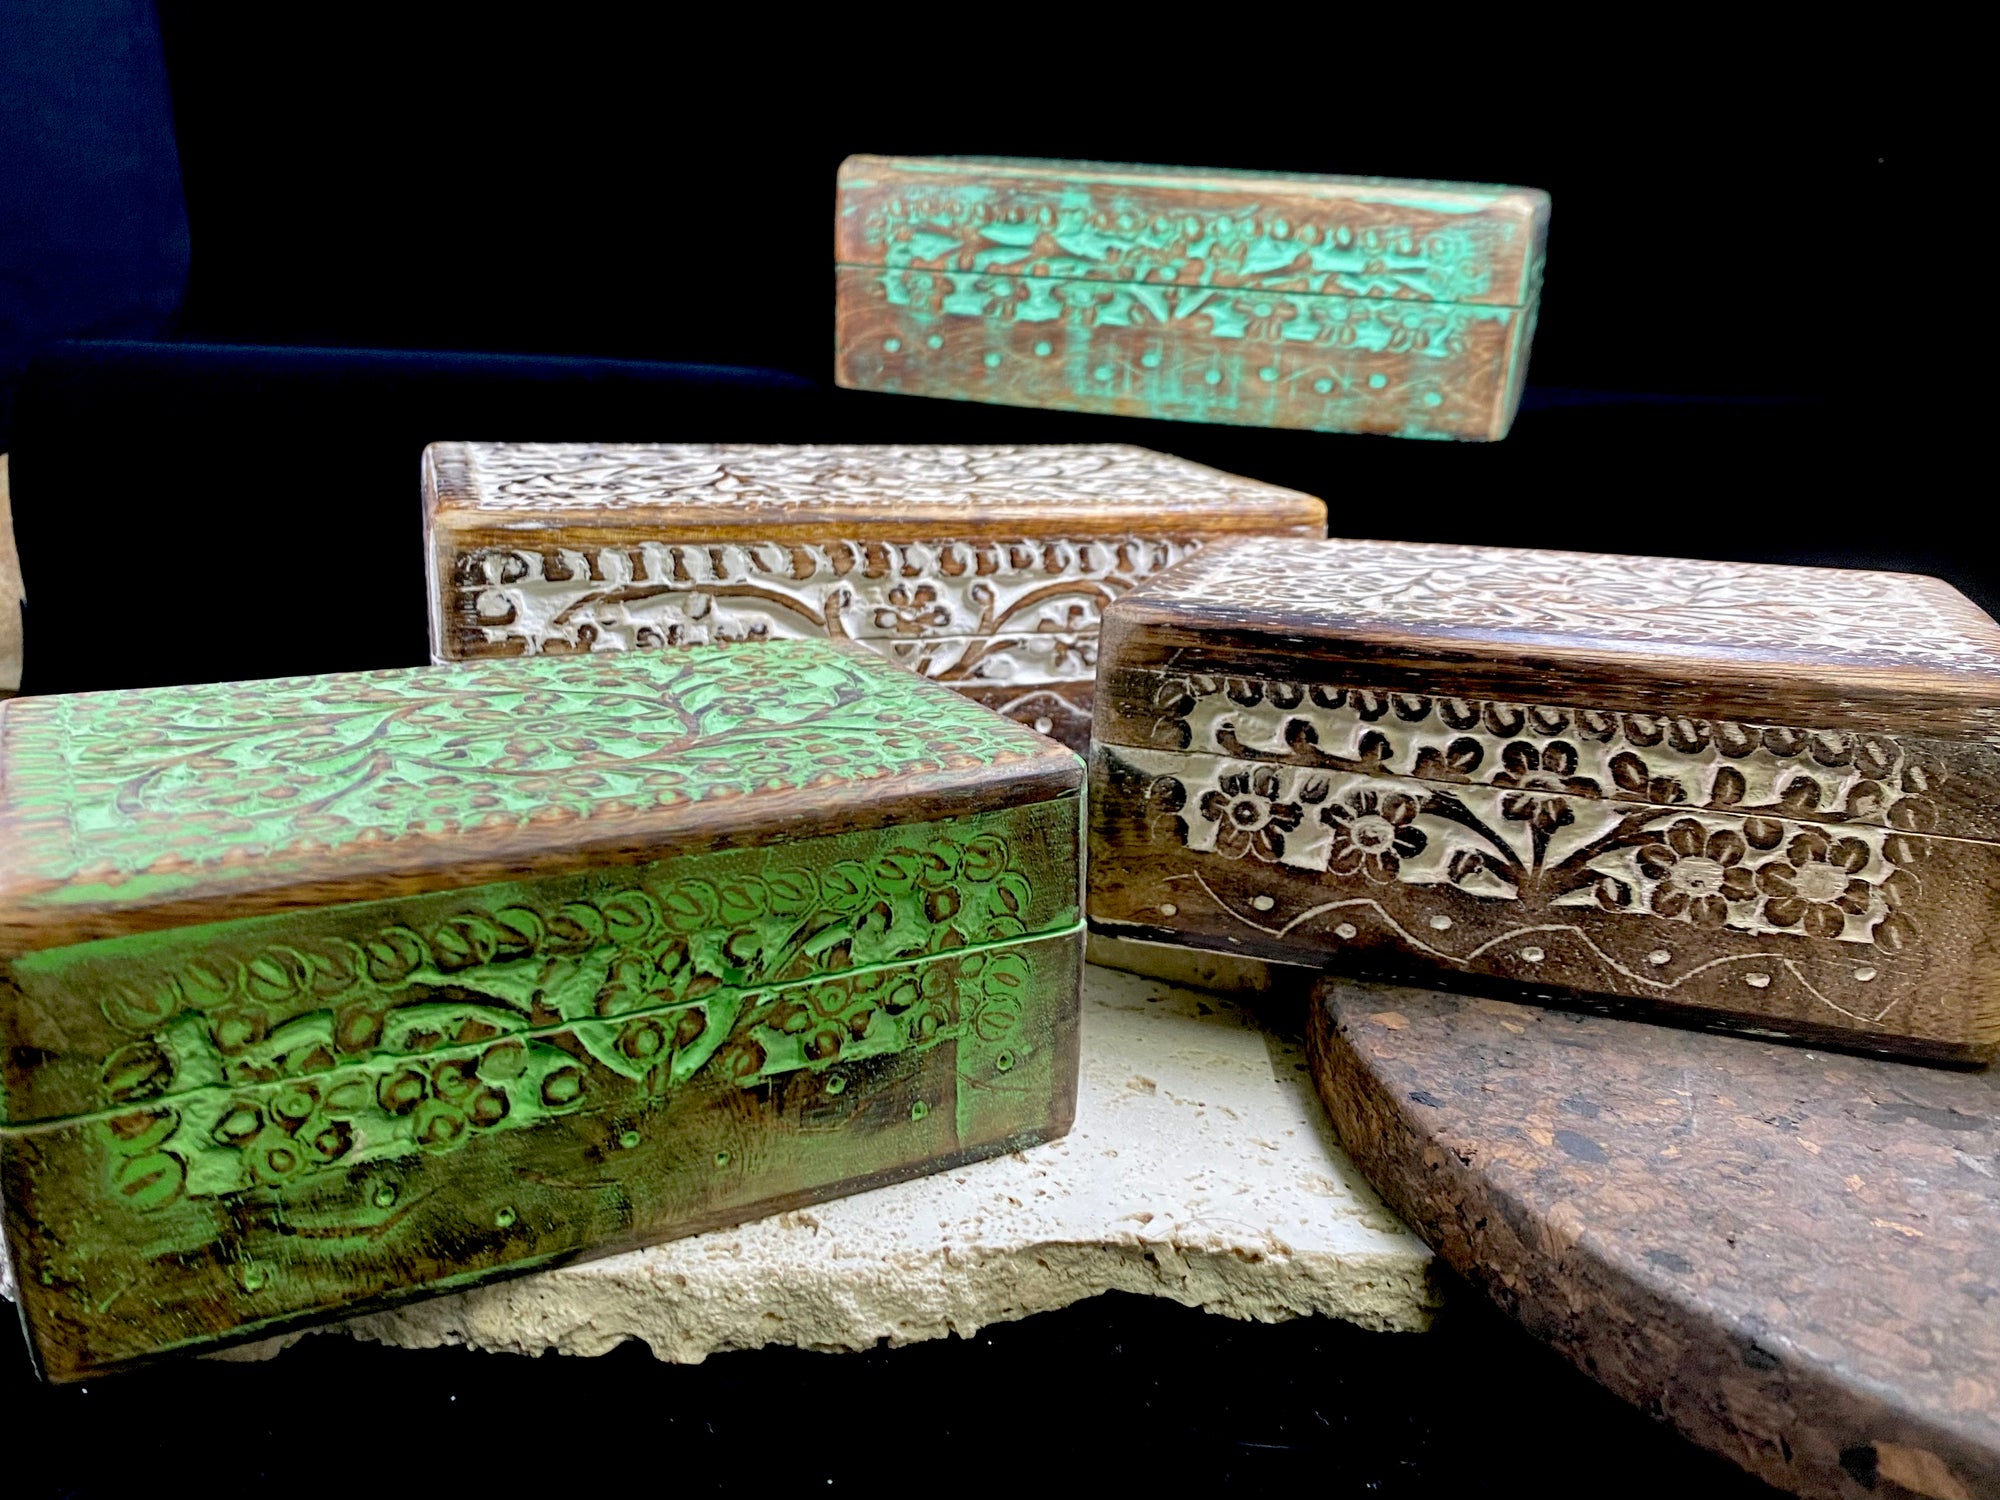 Hand carved solid mango wood boxes in two sizes and four colour finishes